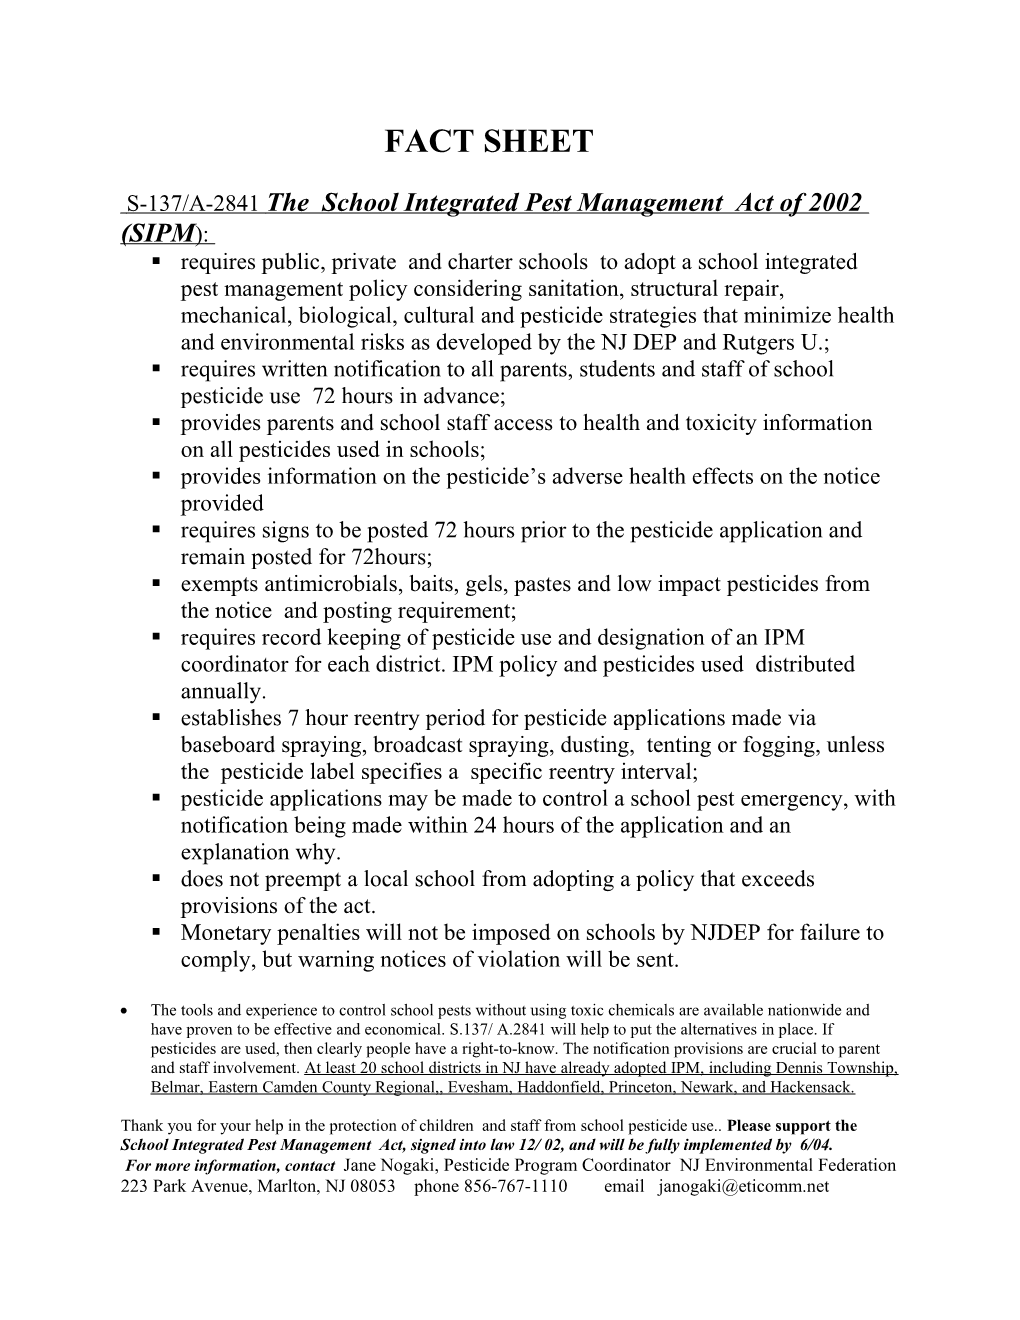 S-137/A-2841 the School Integrated Pest Management Act of 2002 (SIPM )